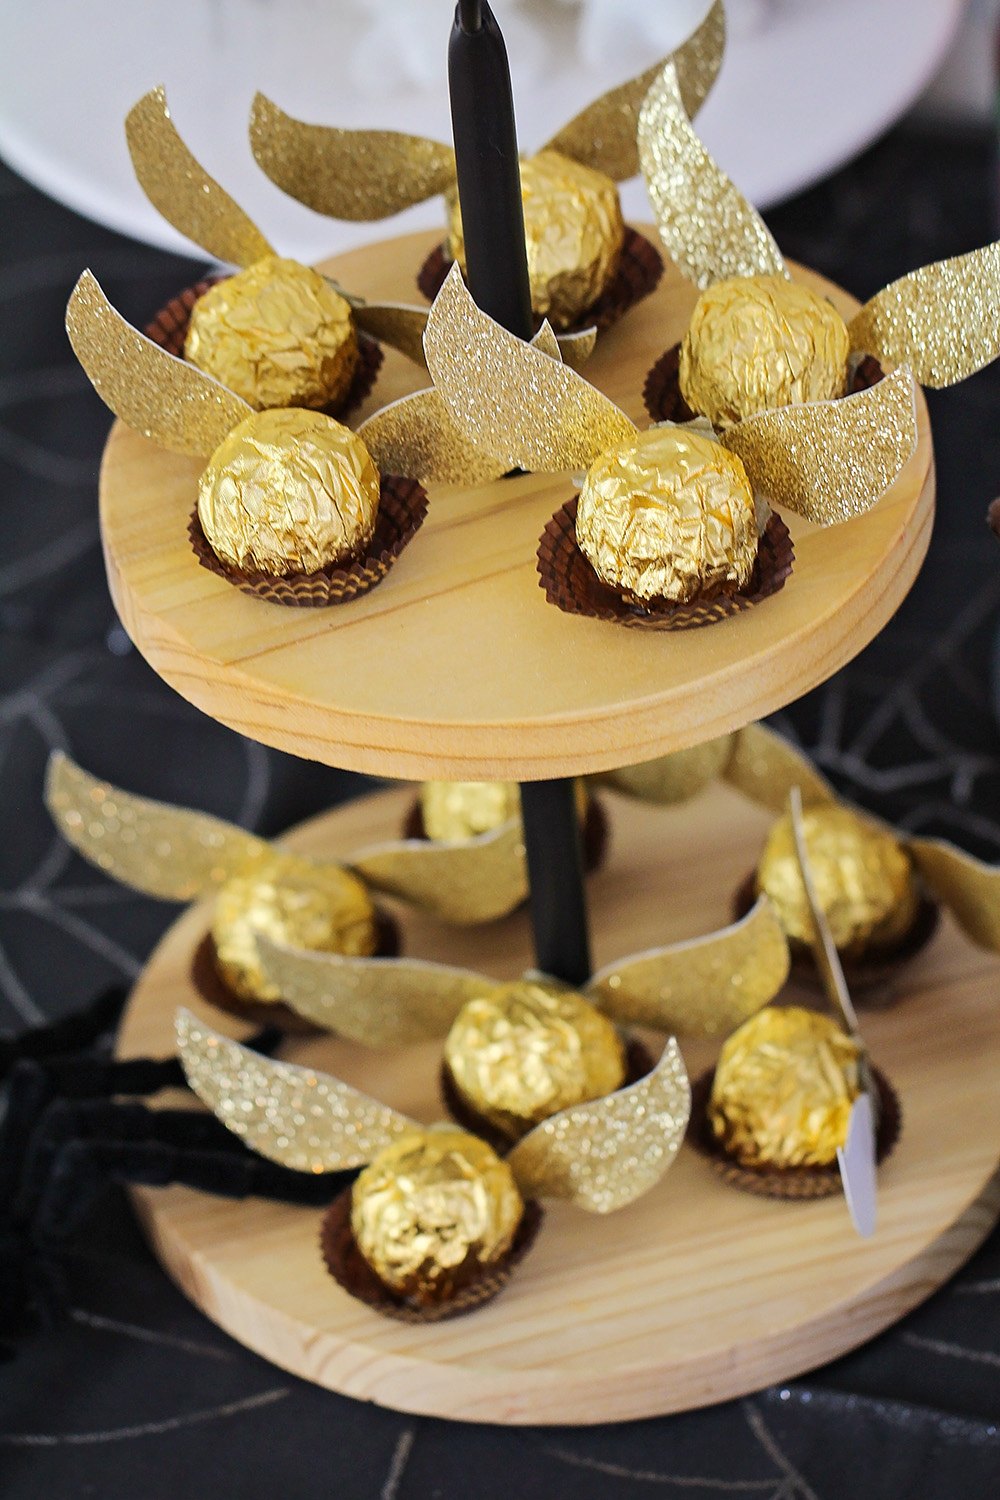 These adorable golden snitches are the perfect touch for a Harry Potter party. They're simple and quick to make, and add a little sparkle to the table!